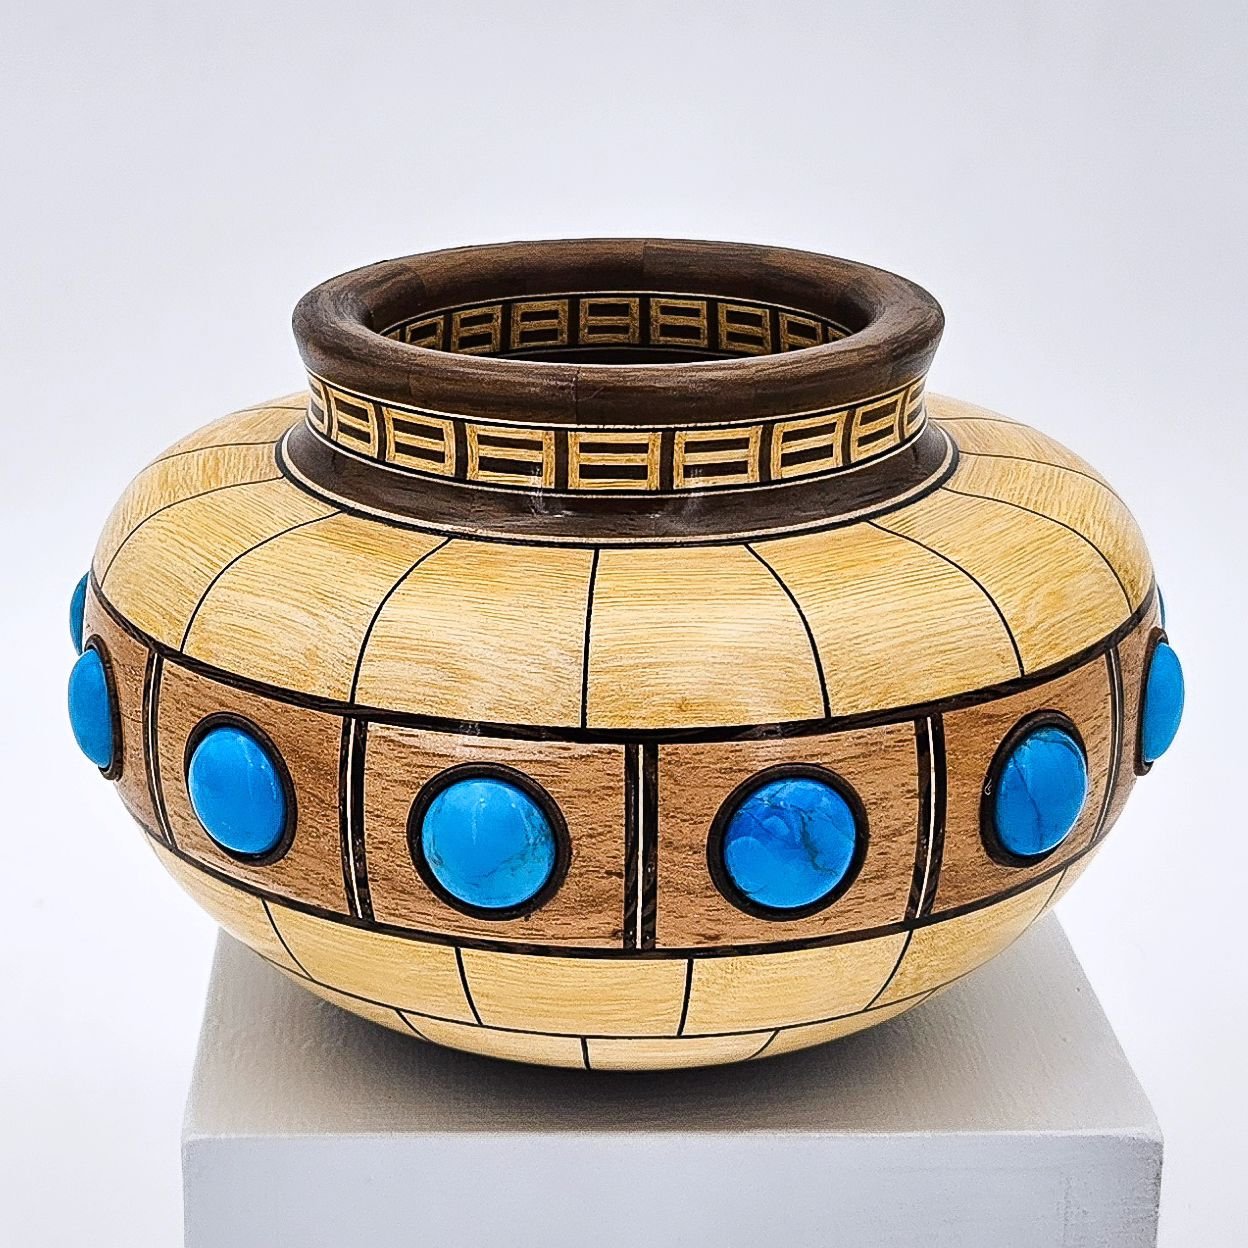 The Lil Vessel Series. A small segmented vessel made from Goiabao (Kimboto), Pecan, Wenge, Black Walnut, and Turquoise. Approximately 5.75&quot; x 4&quot;. More: See links in bio.
:
:
:
#woodart, #finewoodart, #sculpture, #woodsculpture, #woodturning